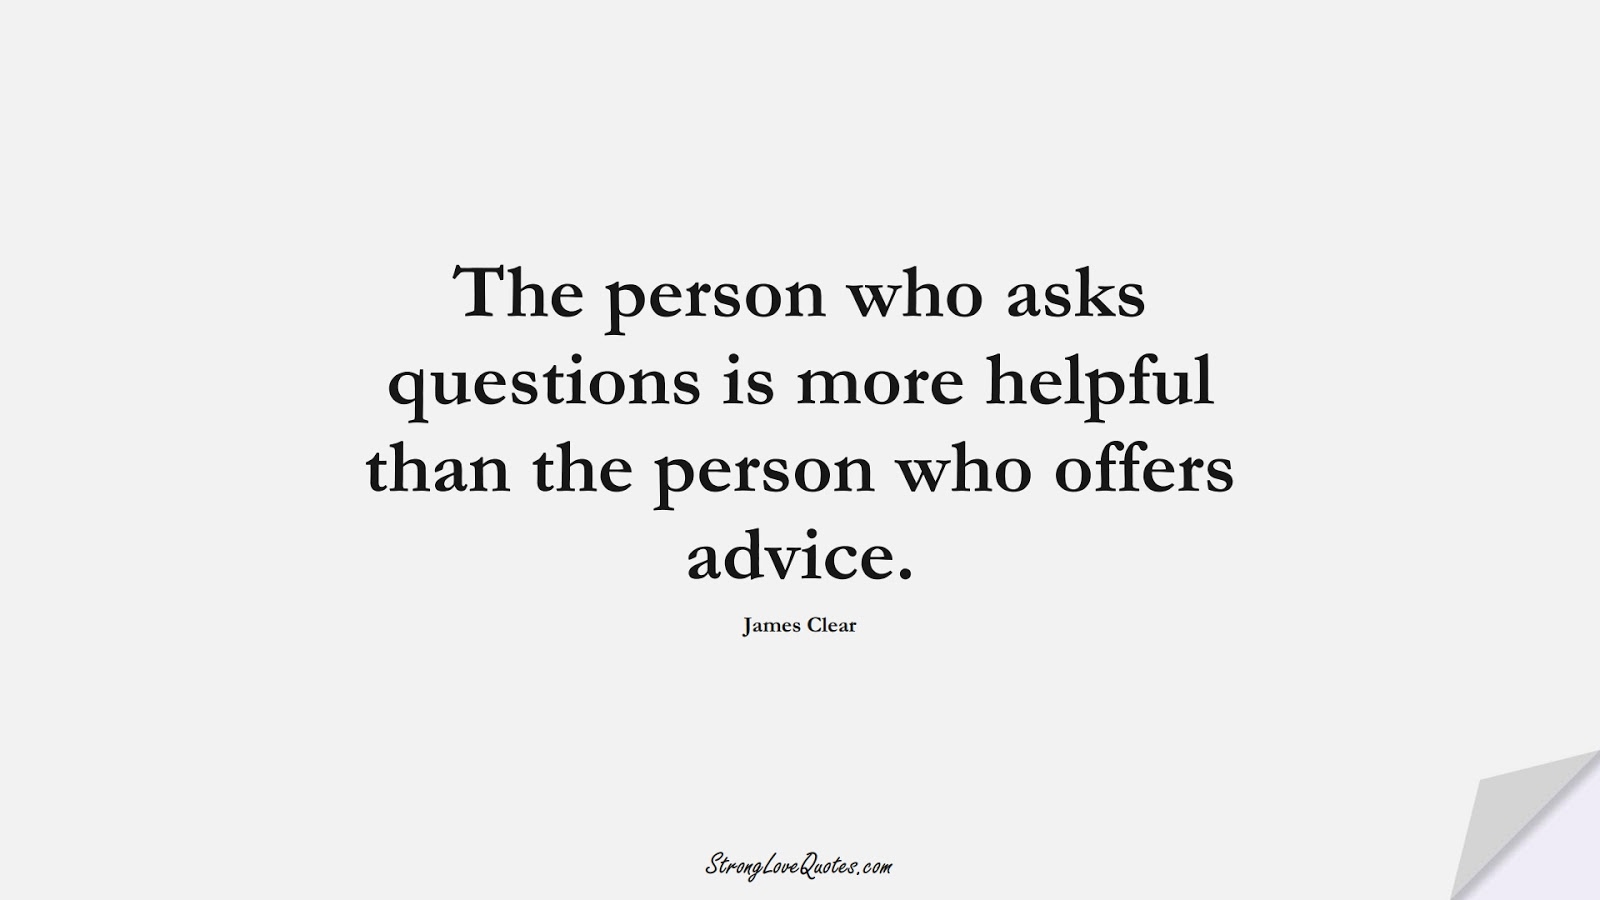 The person who asks questions is more helpful than the person who offers advice. (James Clear);  #EducationQuotes